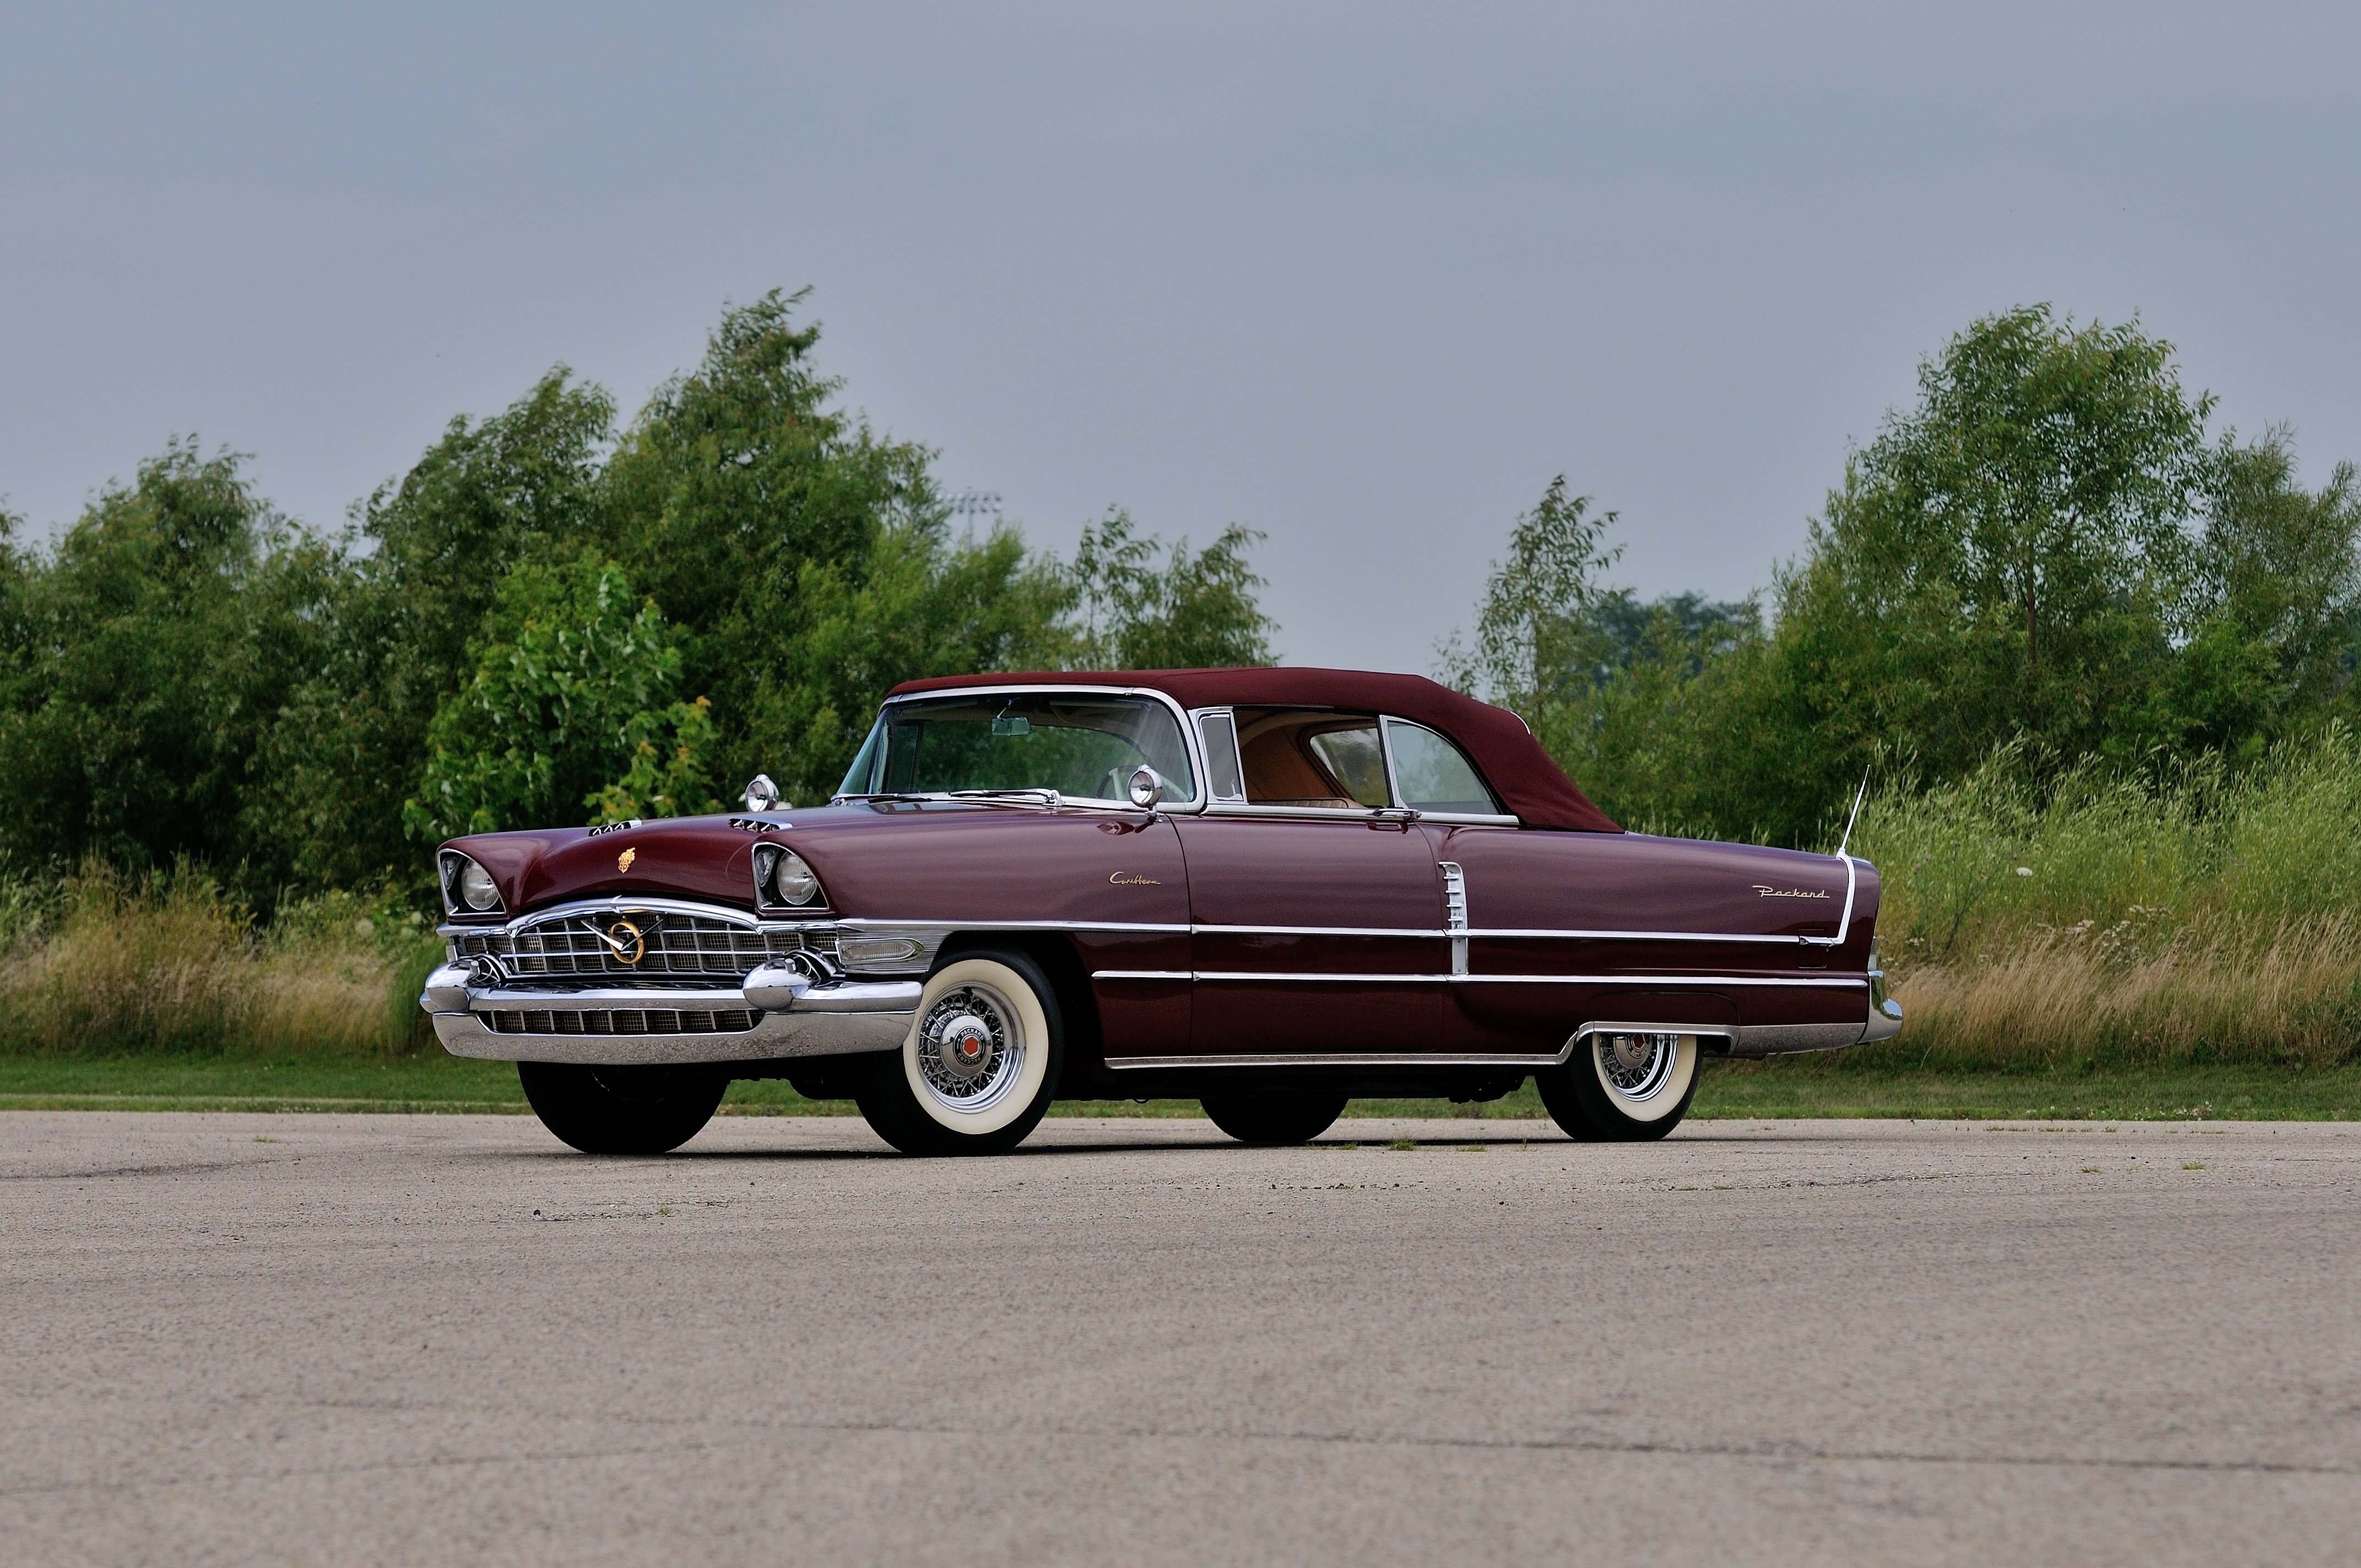 1956, Packard, Caribbean, Convertible, Classic, Old, Vintage, Usa, 4288x2848 01 Wallpaper